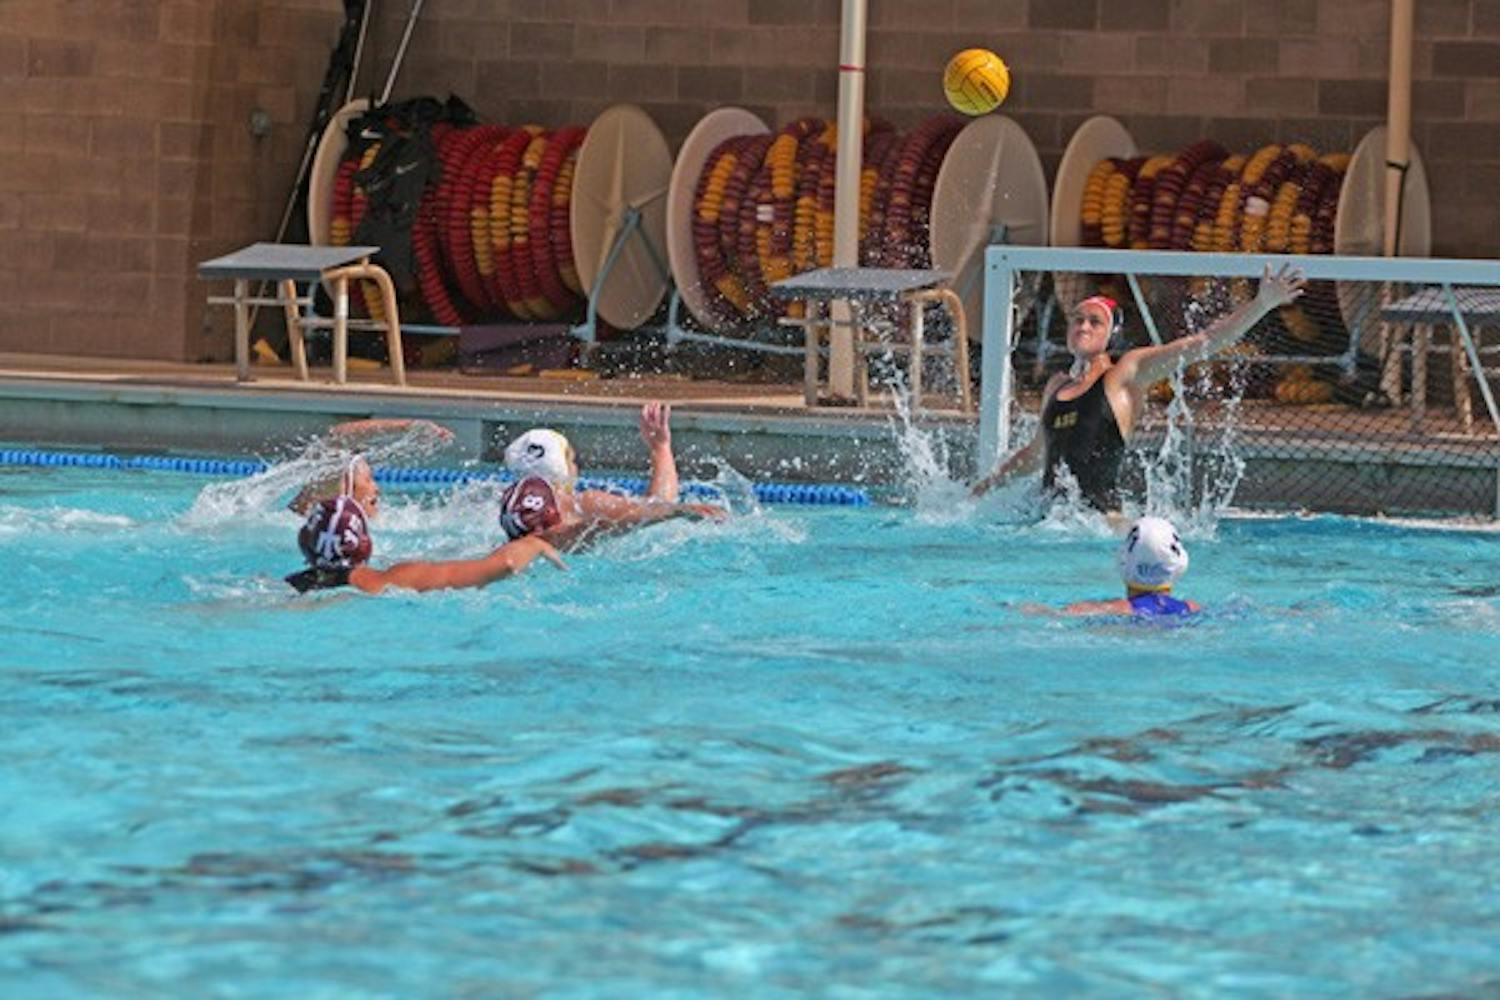 Ranked showdown: ASU freshman goalie Ianeta Hutchinson reaches for the airborne ball during the No. 11 Sun Devils’ 16-7 win over Cal Baptist on March 5. The team heads to No. 5 Hawaii for another shot at breaking its conference losing streak. (Photo by Beth Easterbrook)